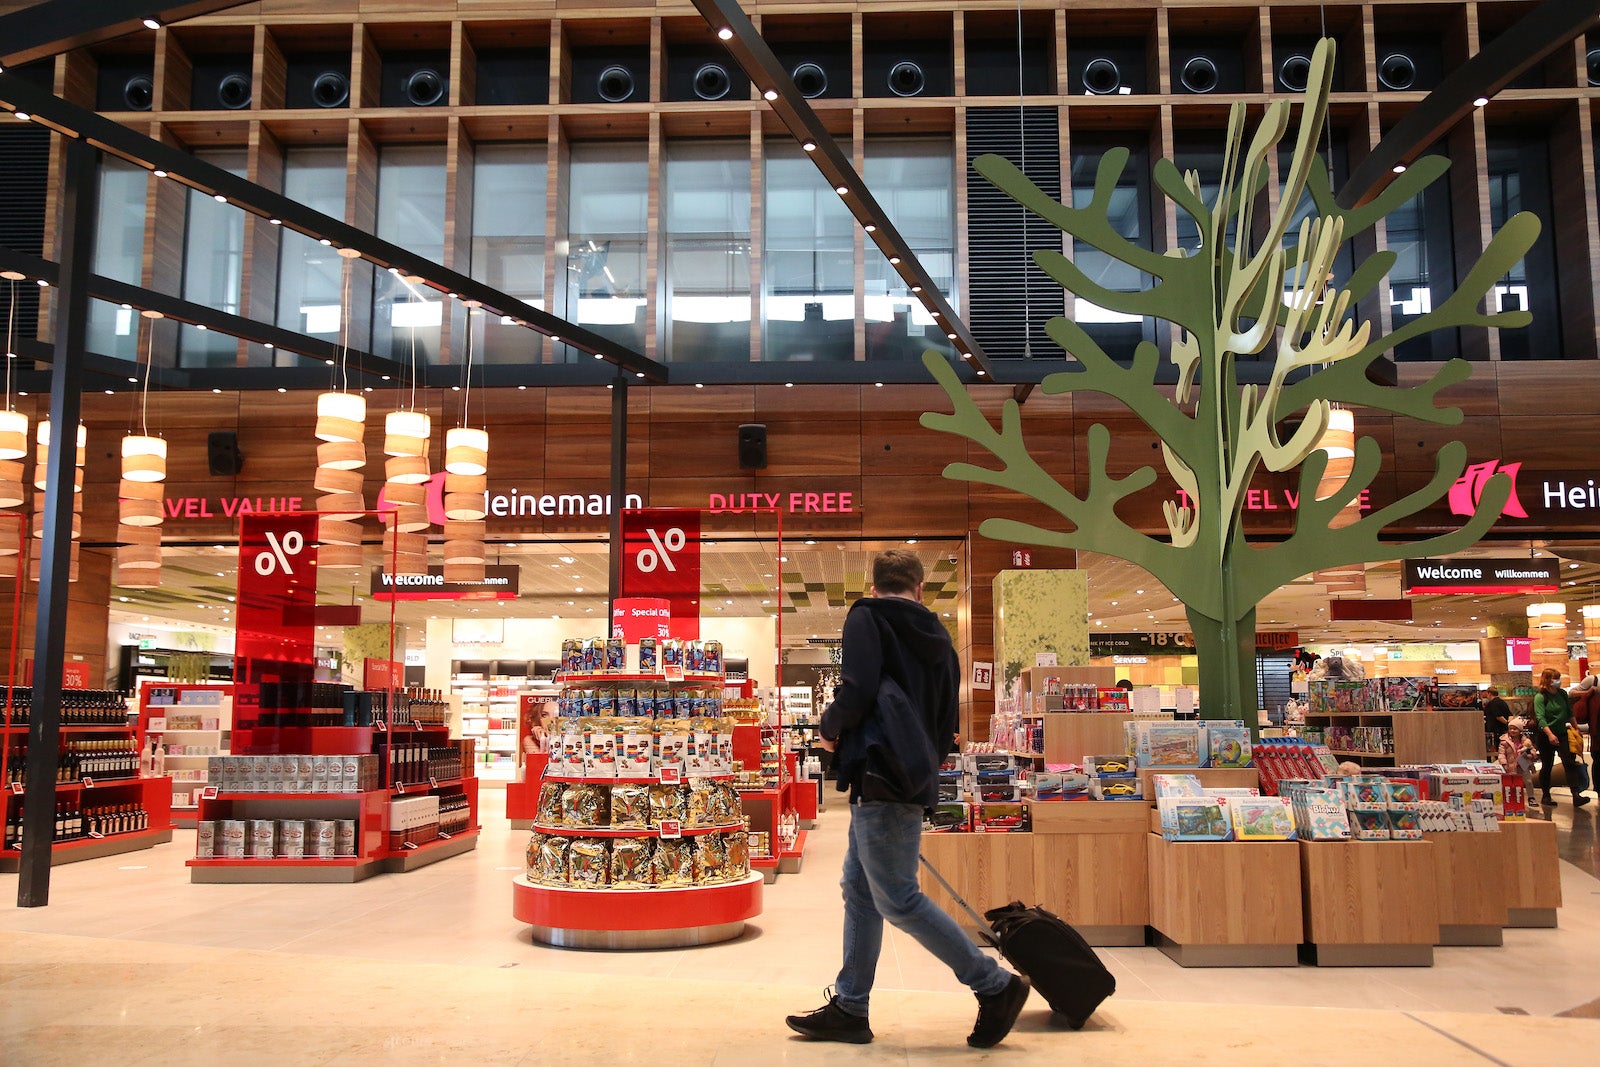 Duty free: The truth about shopping in Airports